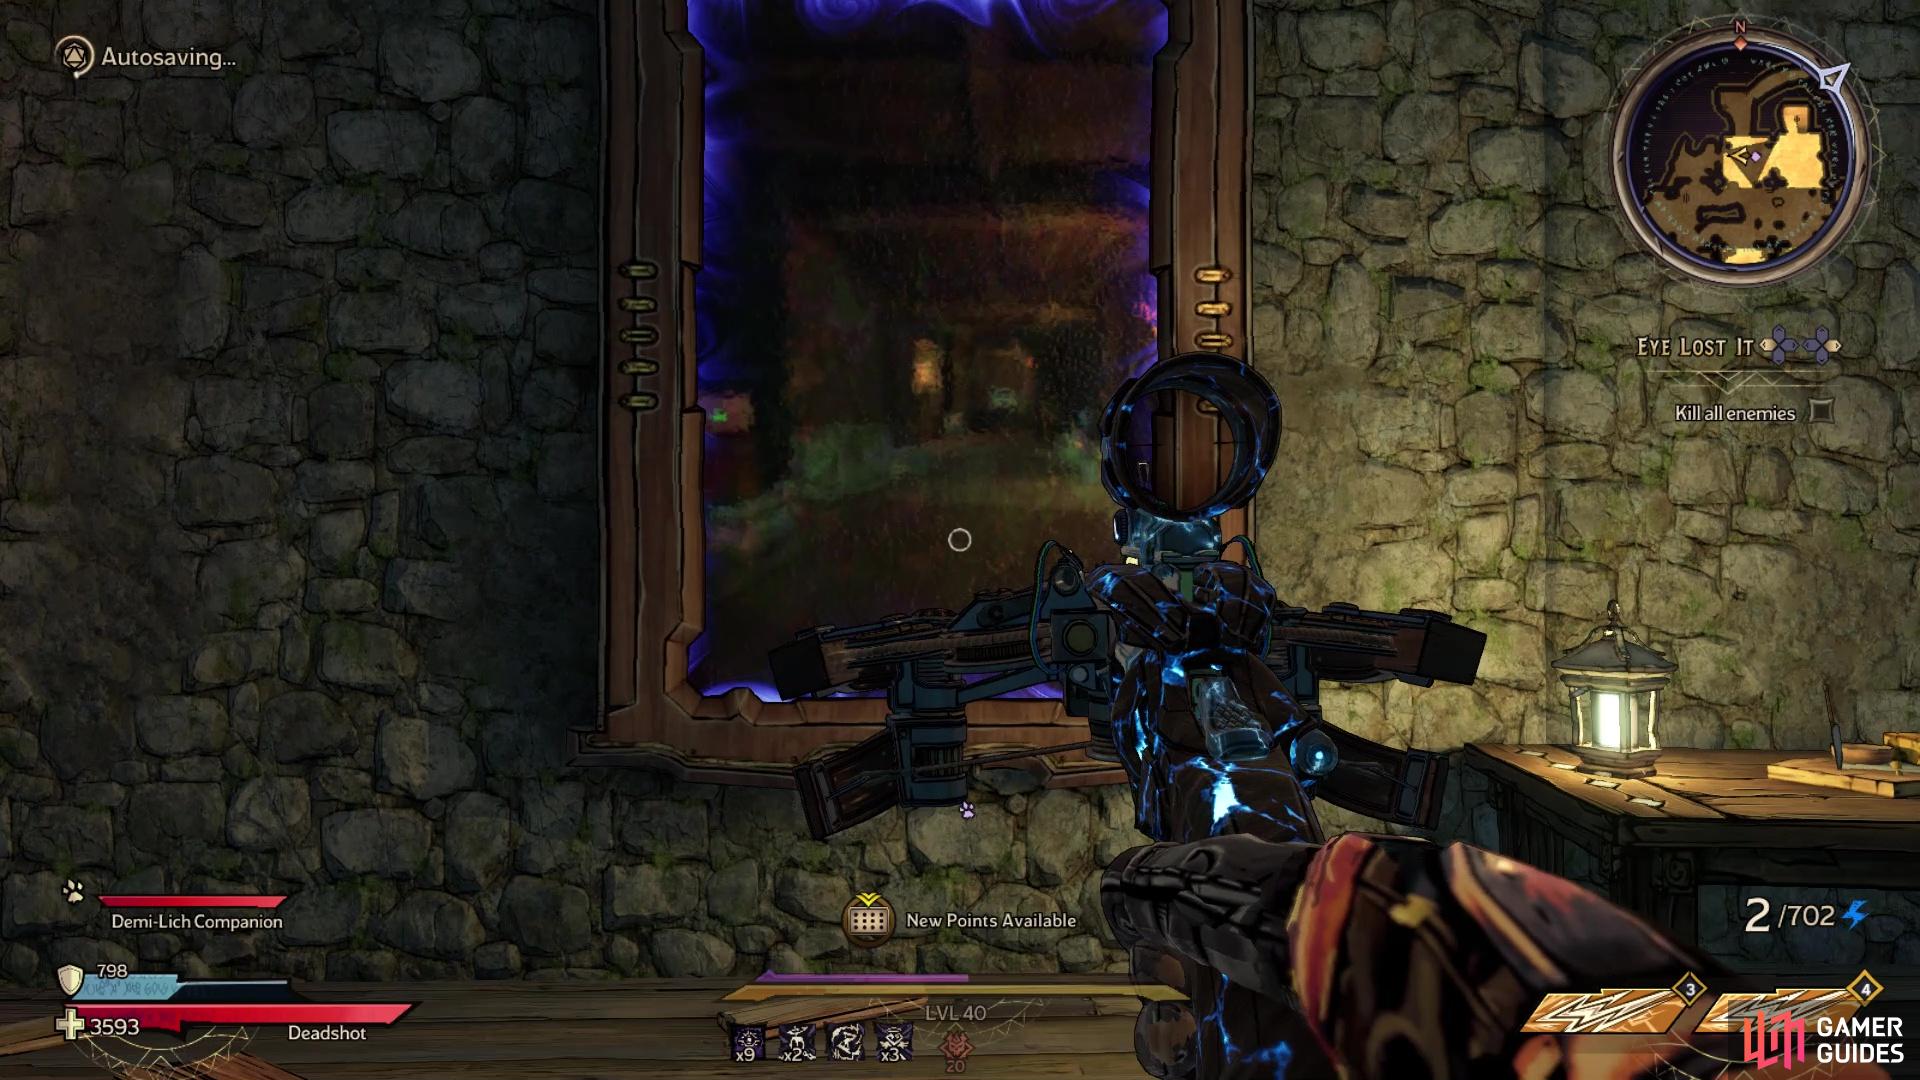 This mirror is really a portal